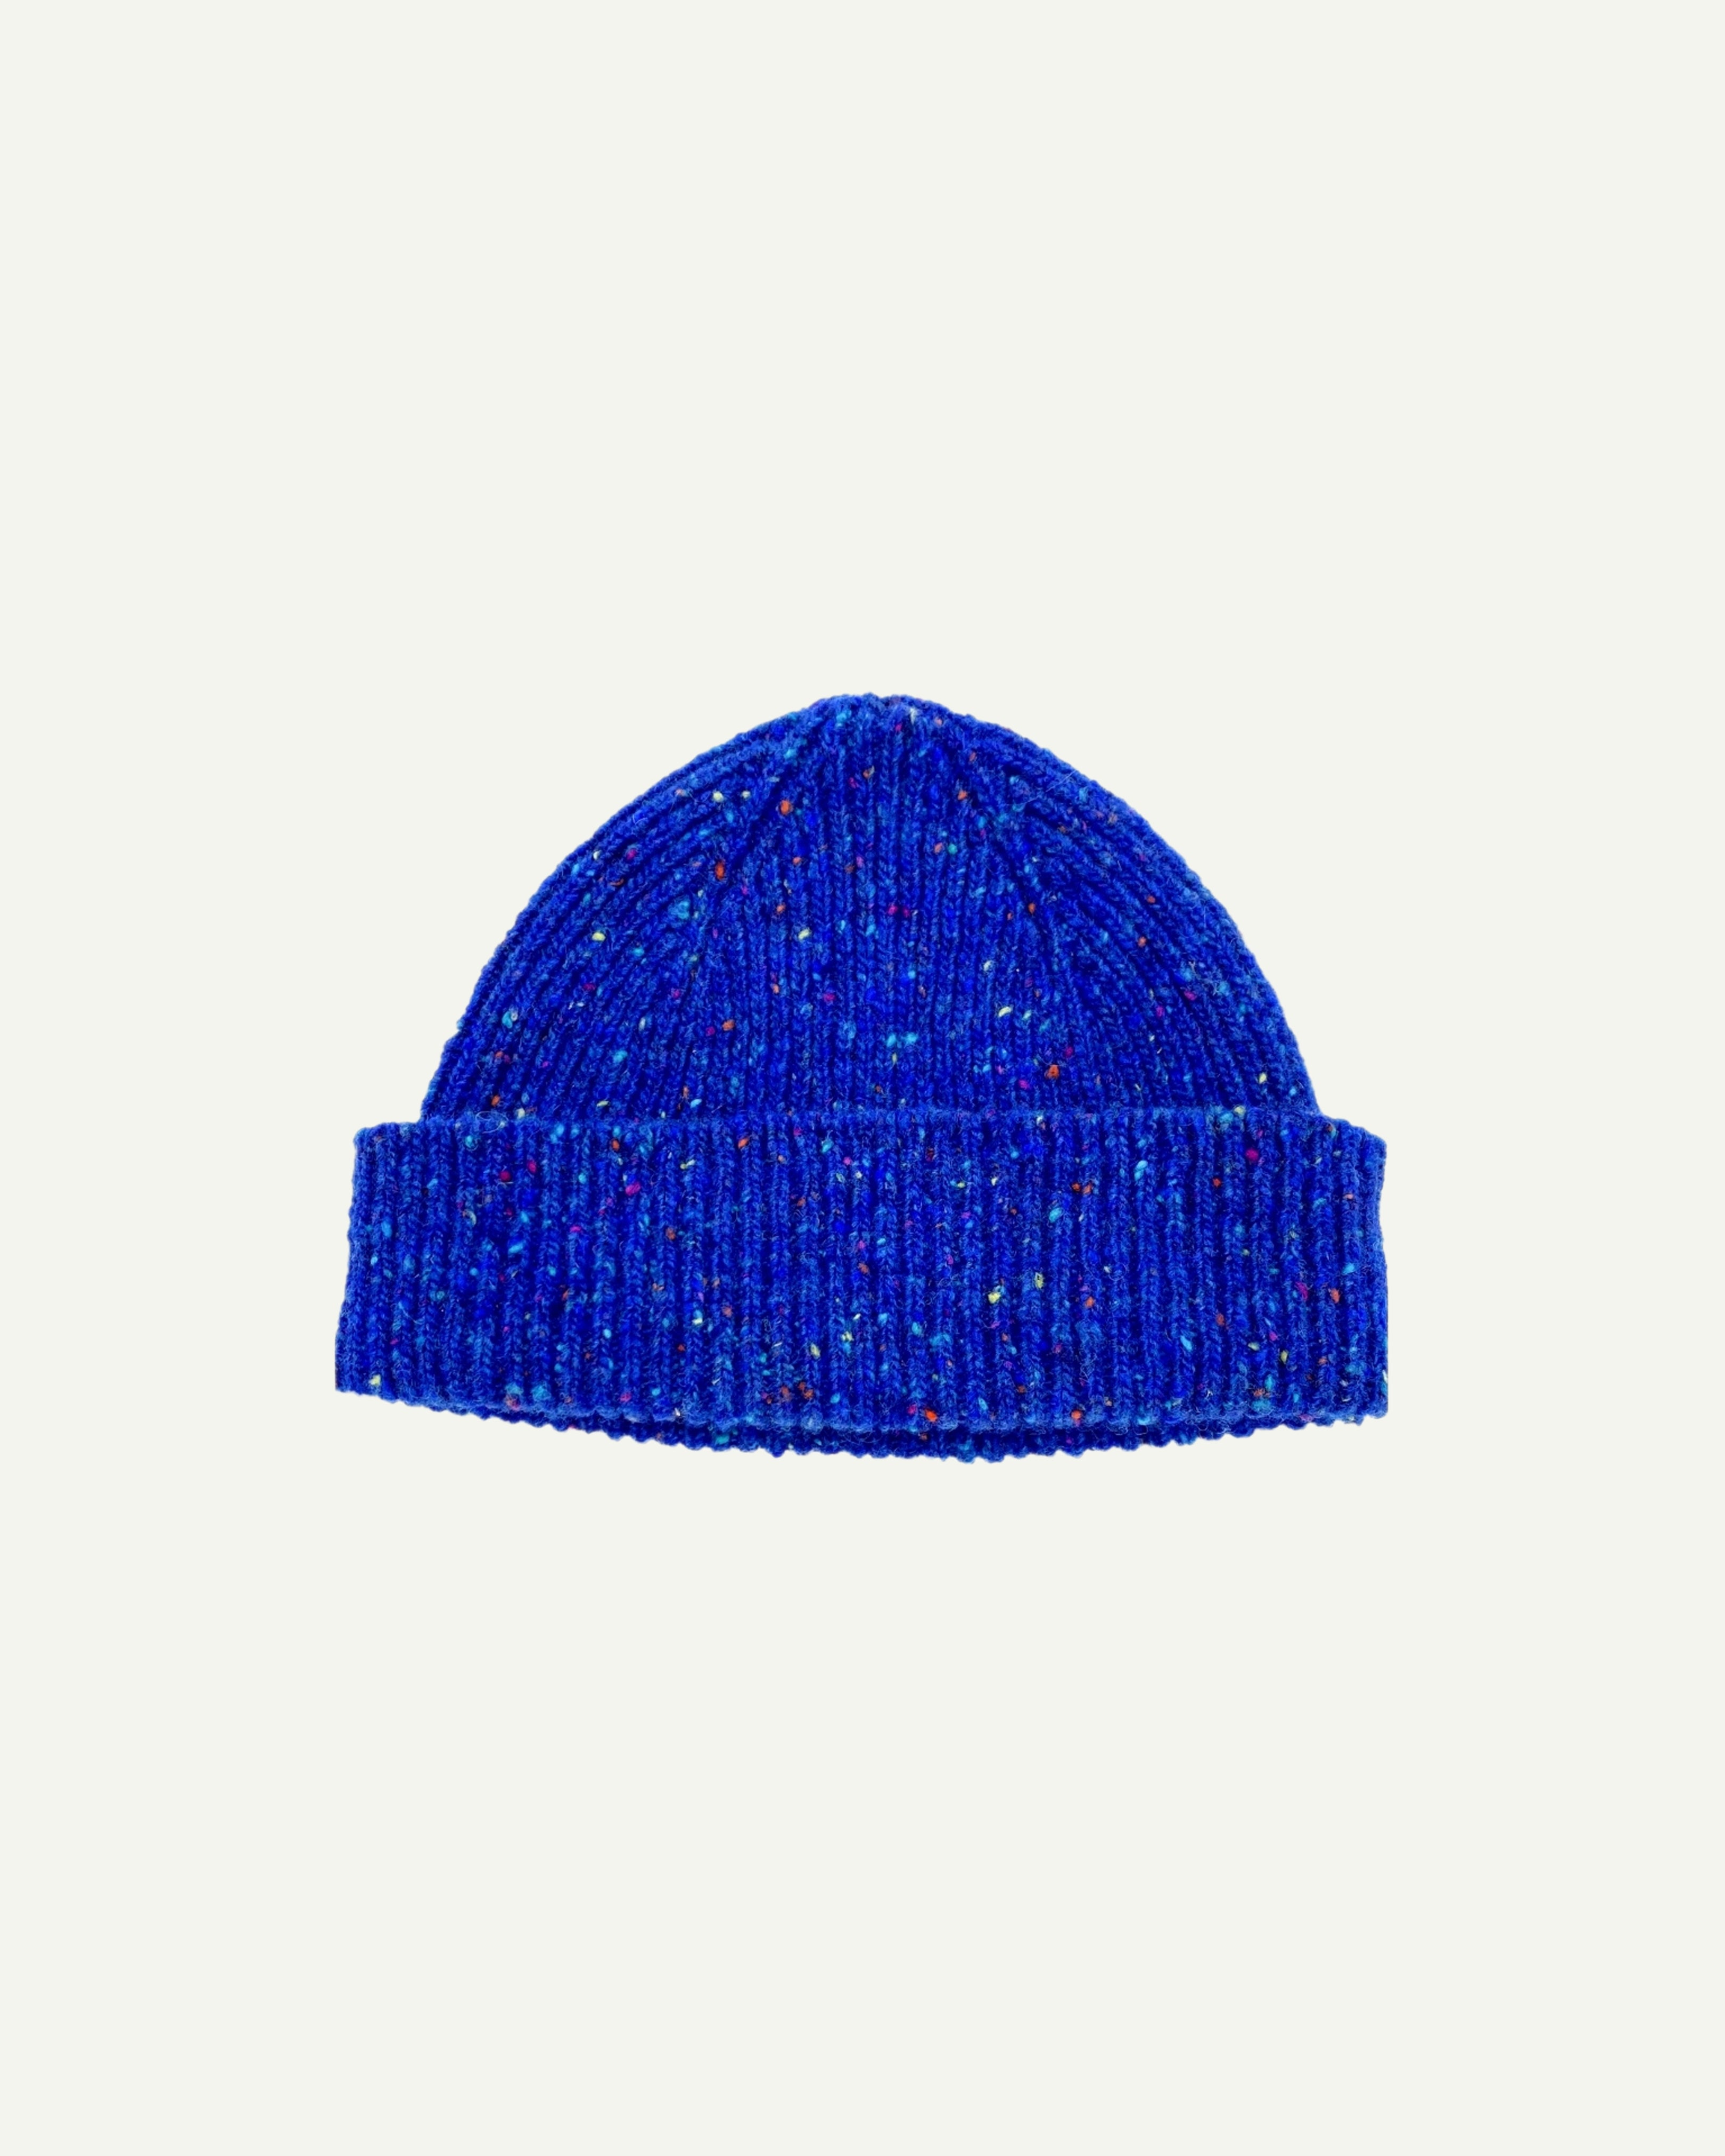  Flat view of Uskees 4003 donegal wool hat in 'ultra blue' . The image clearly shows the adjustable cuff of this bright blue hat.